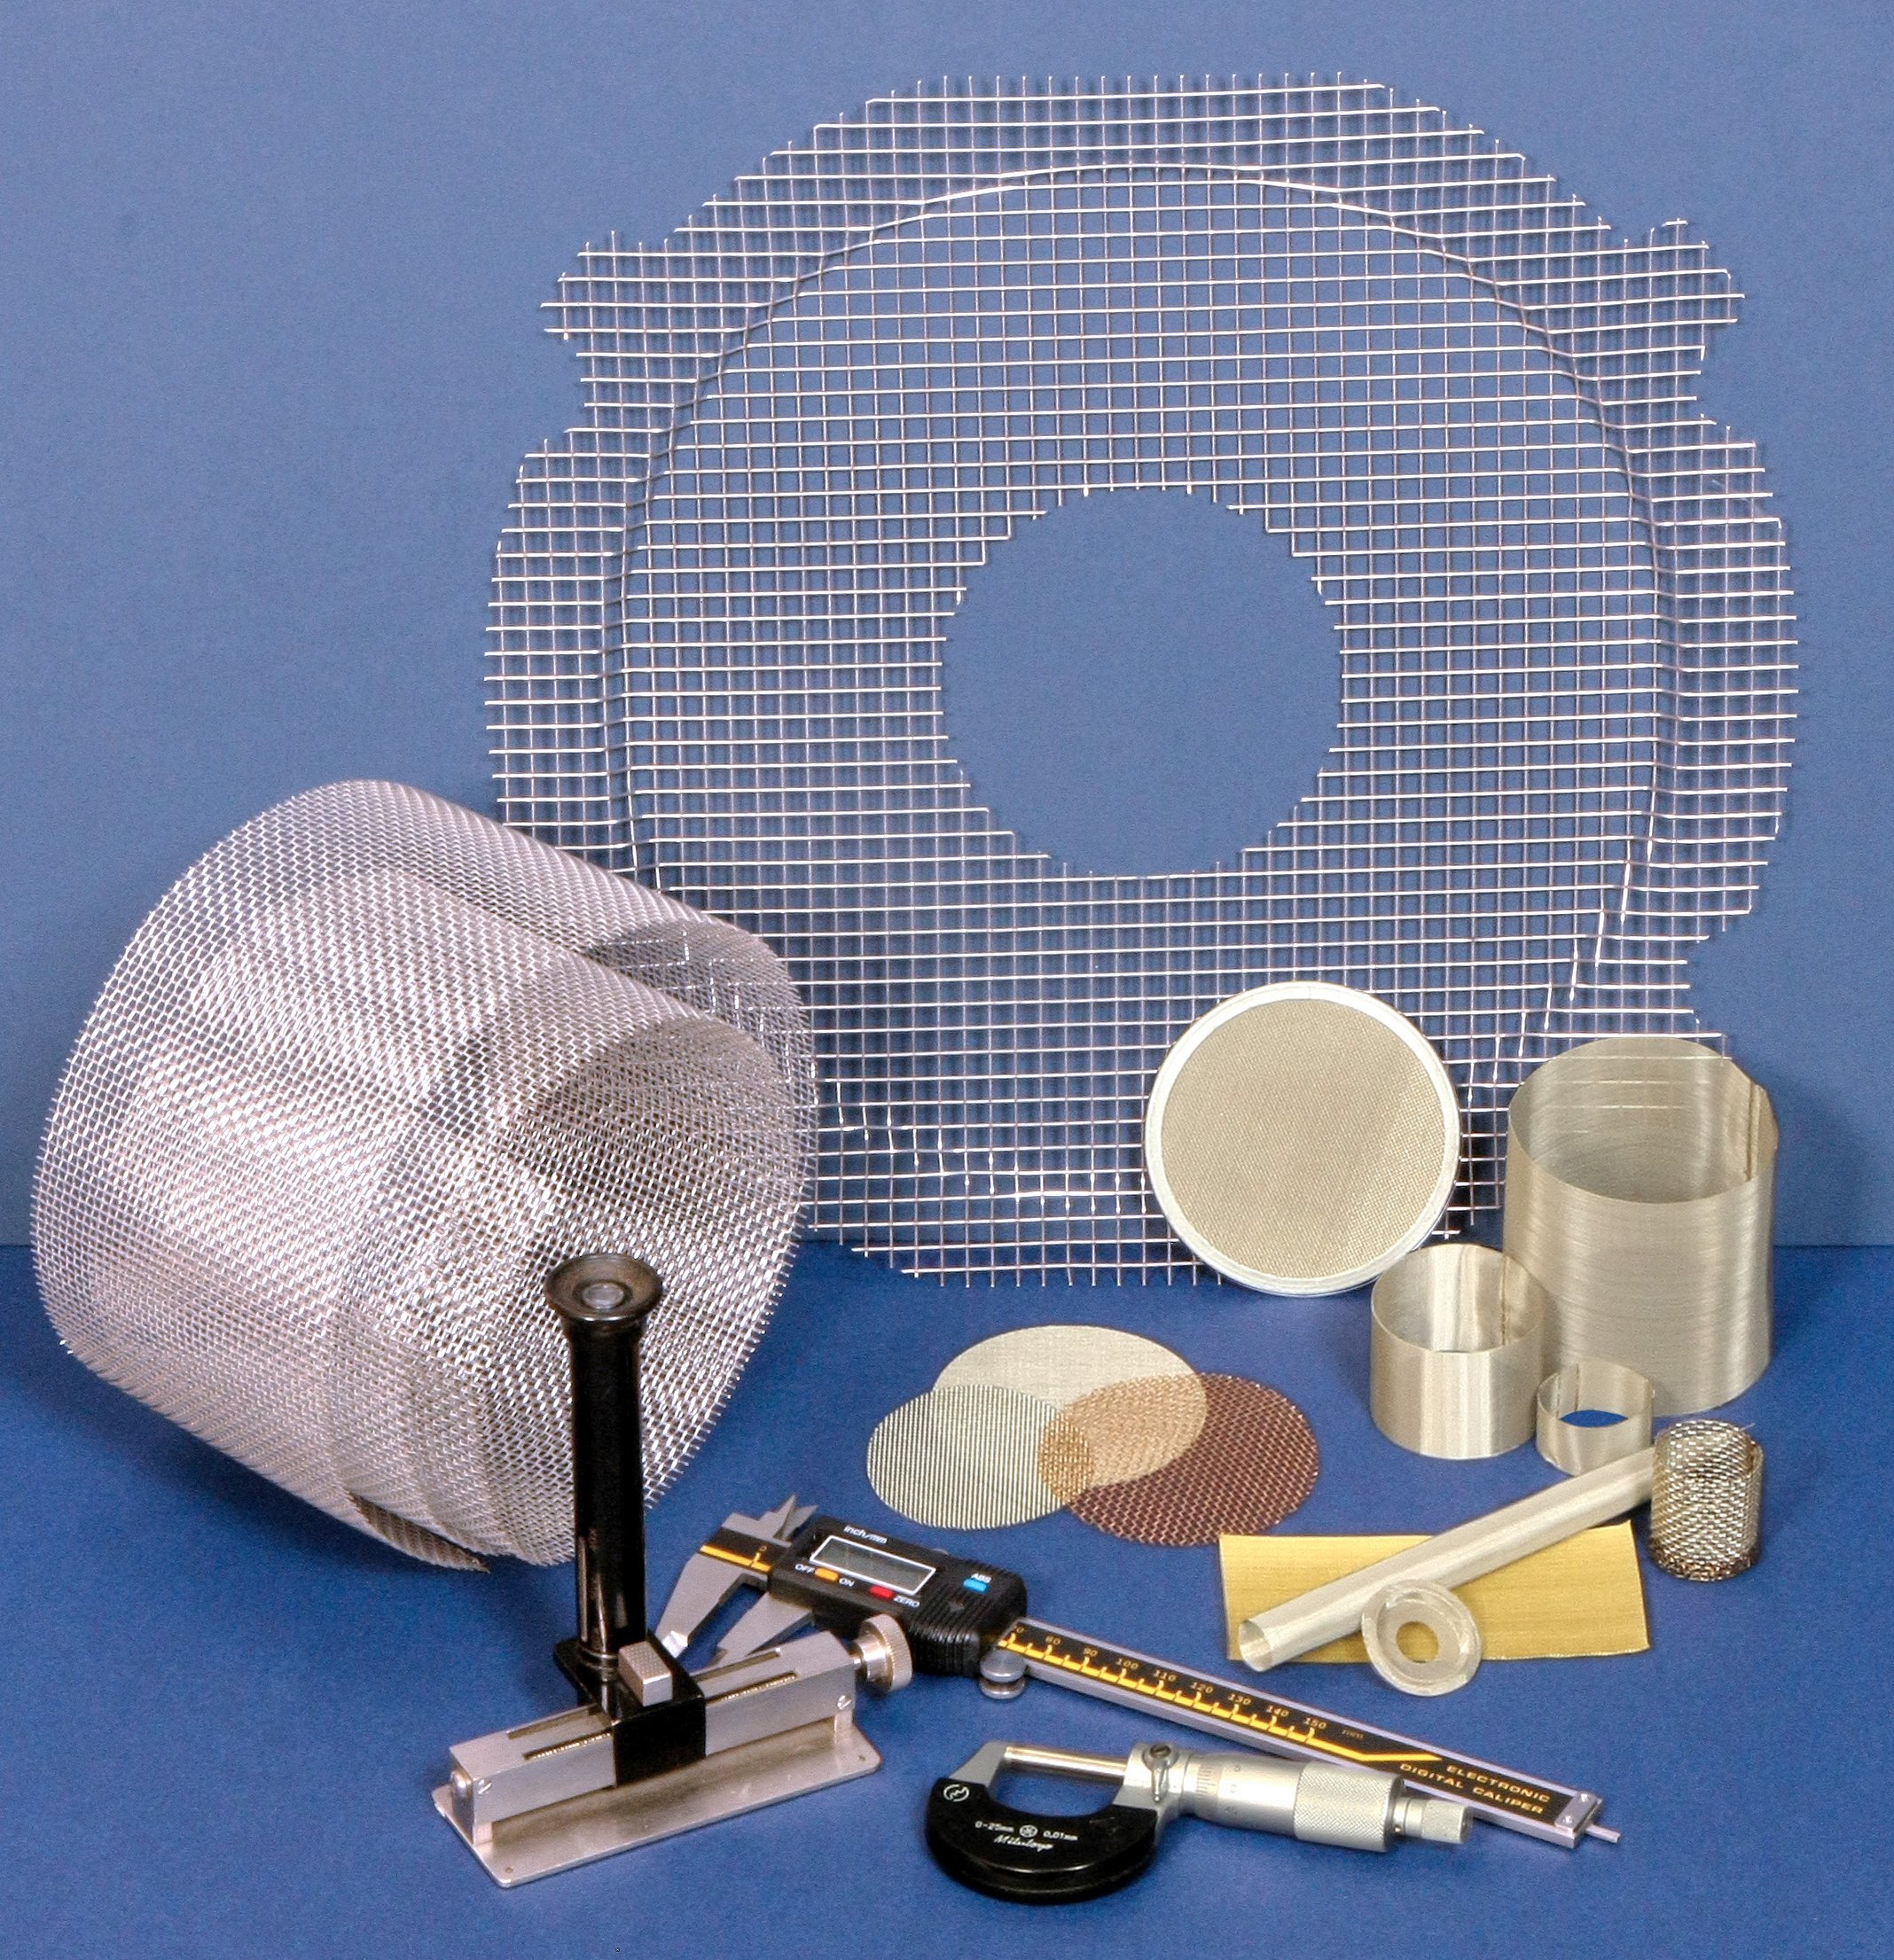 Woven wire mesh filtration products with measuring equipment